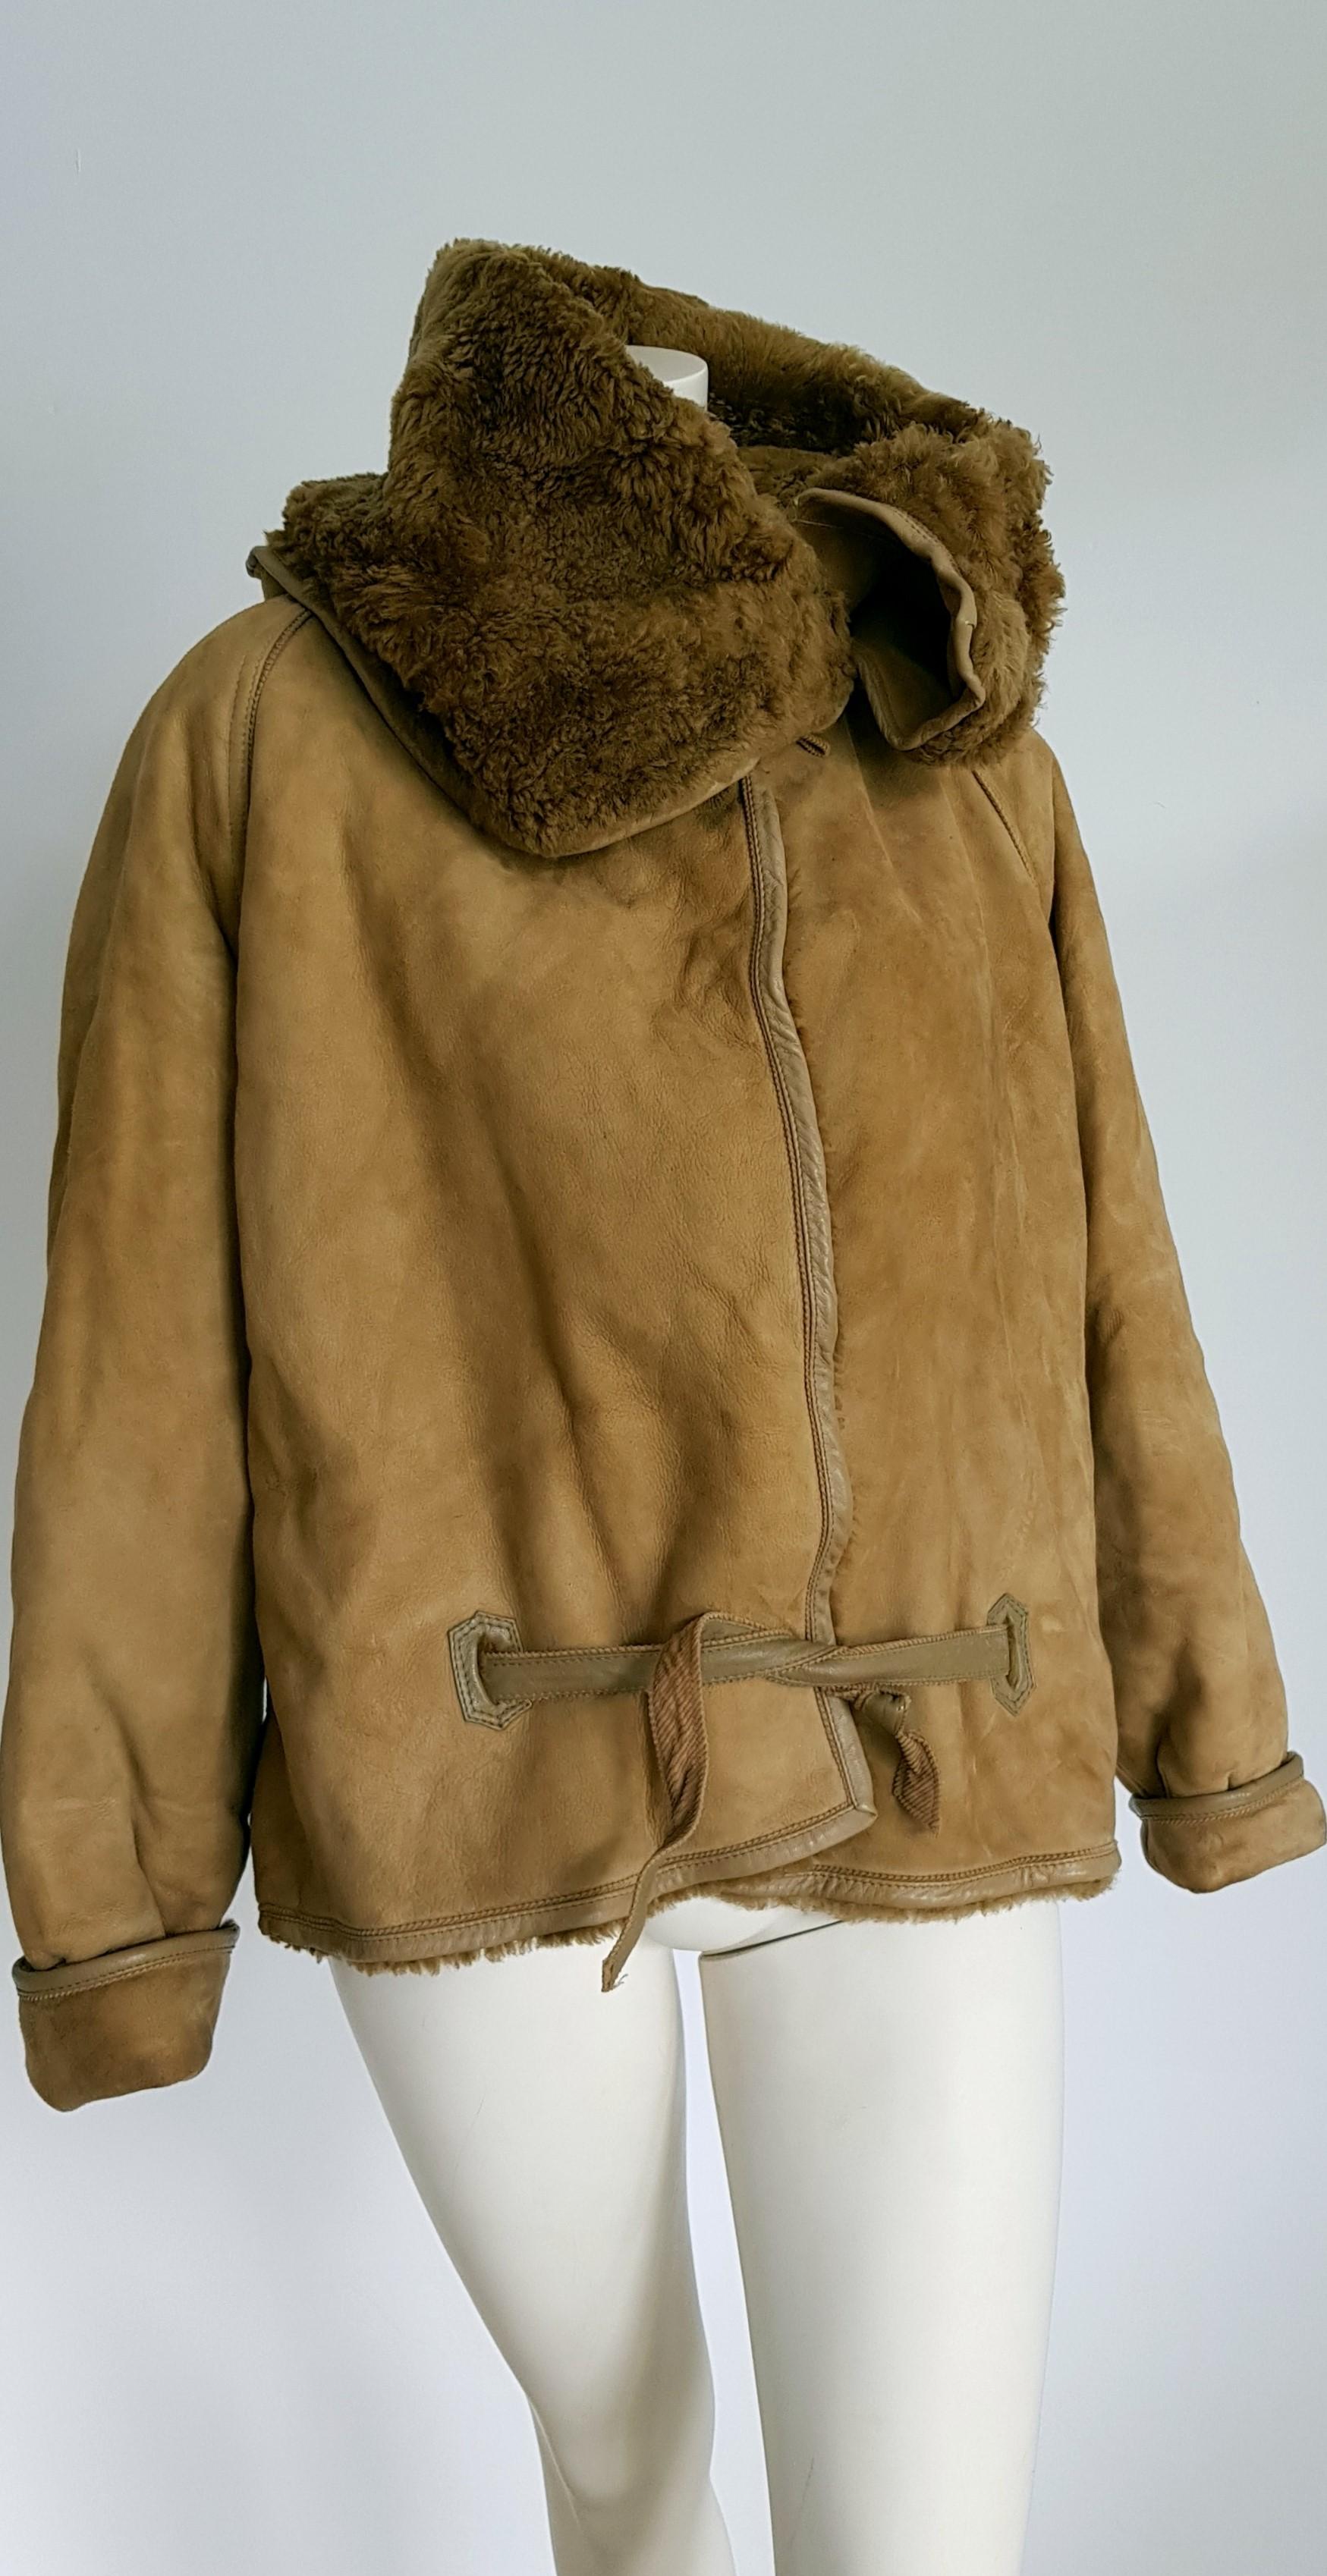 Gianni VERSACE green beige leather, natural fur lined -pure shearling-, aviator model jacket, single piece unique design - Unworn, New.

SIZE: equivalent to about Small / Medium, please review approx measurements as follows in cm: lenght 78, chest